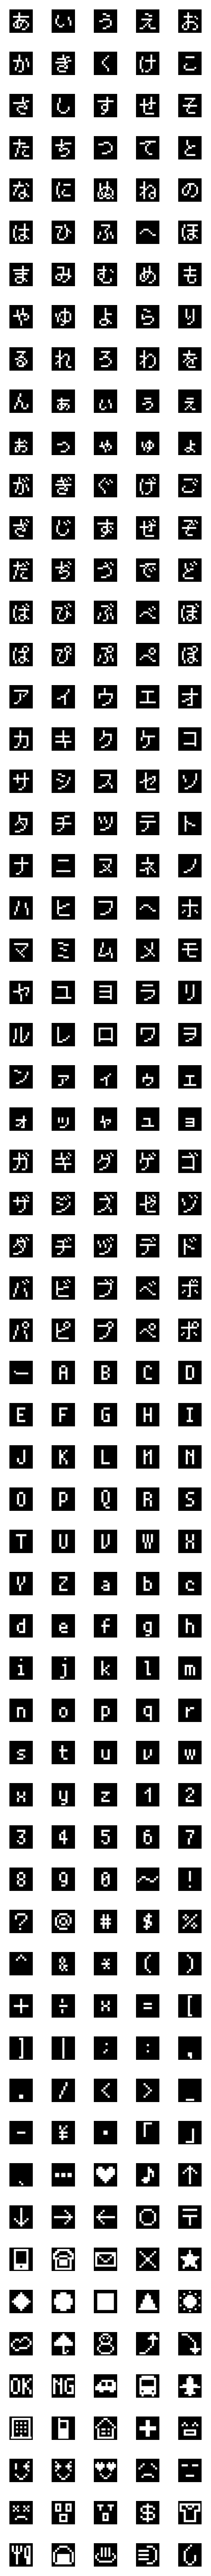 [LINE絵文字]RPG風の絵文字の画像一覧